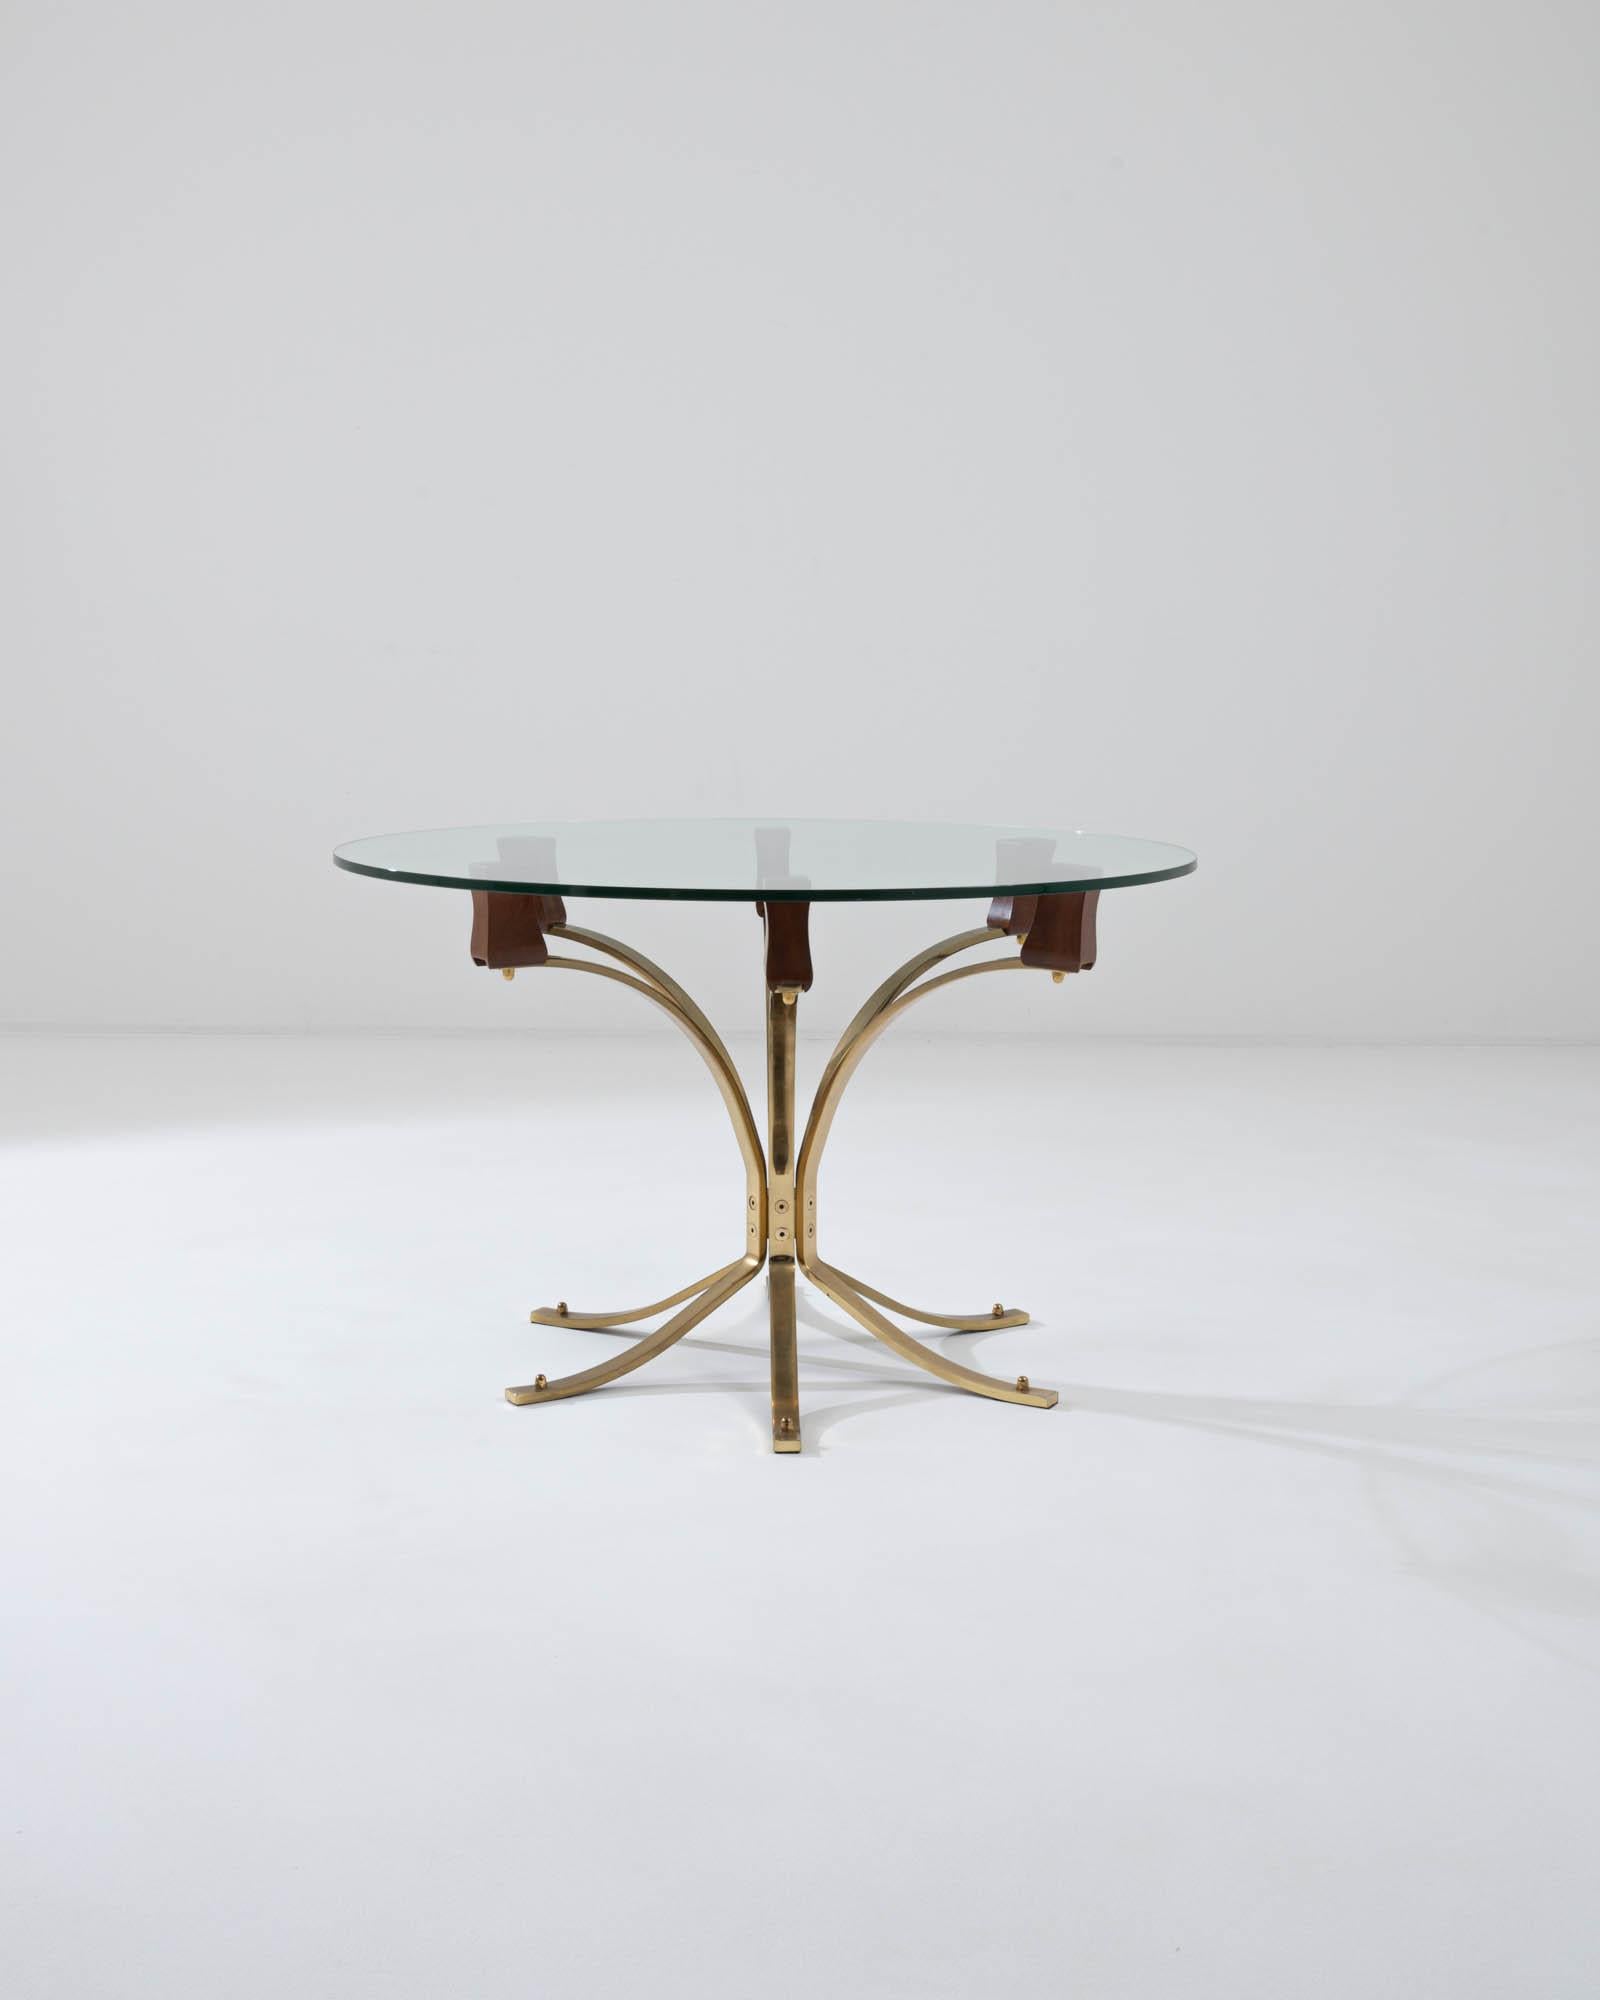 The sophisticated design of this vintage brass side table creates an impression of luxury and precision. Made in Scandinavia in the 20th century, the fanning array of slender brass legs have a mechanical clarity; curved wooden blocks form a bridge